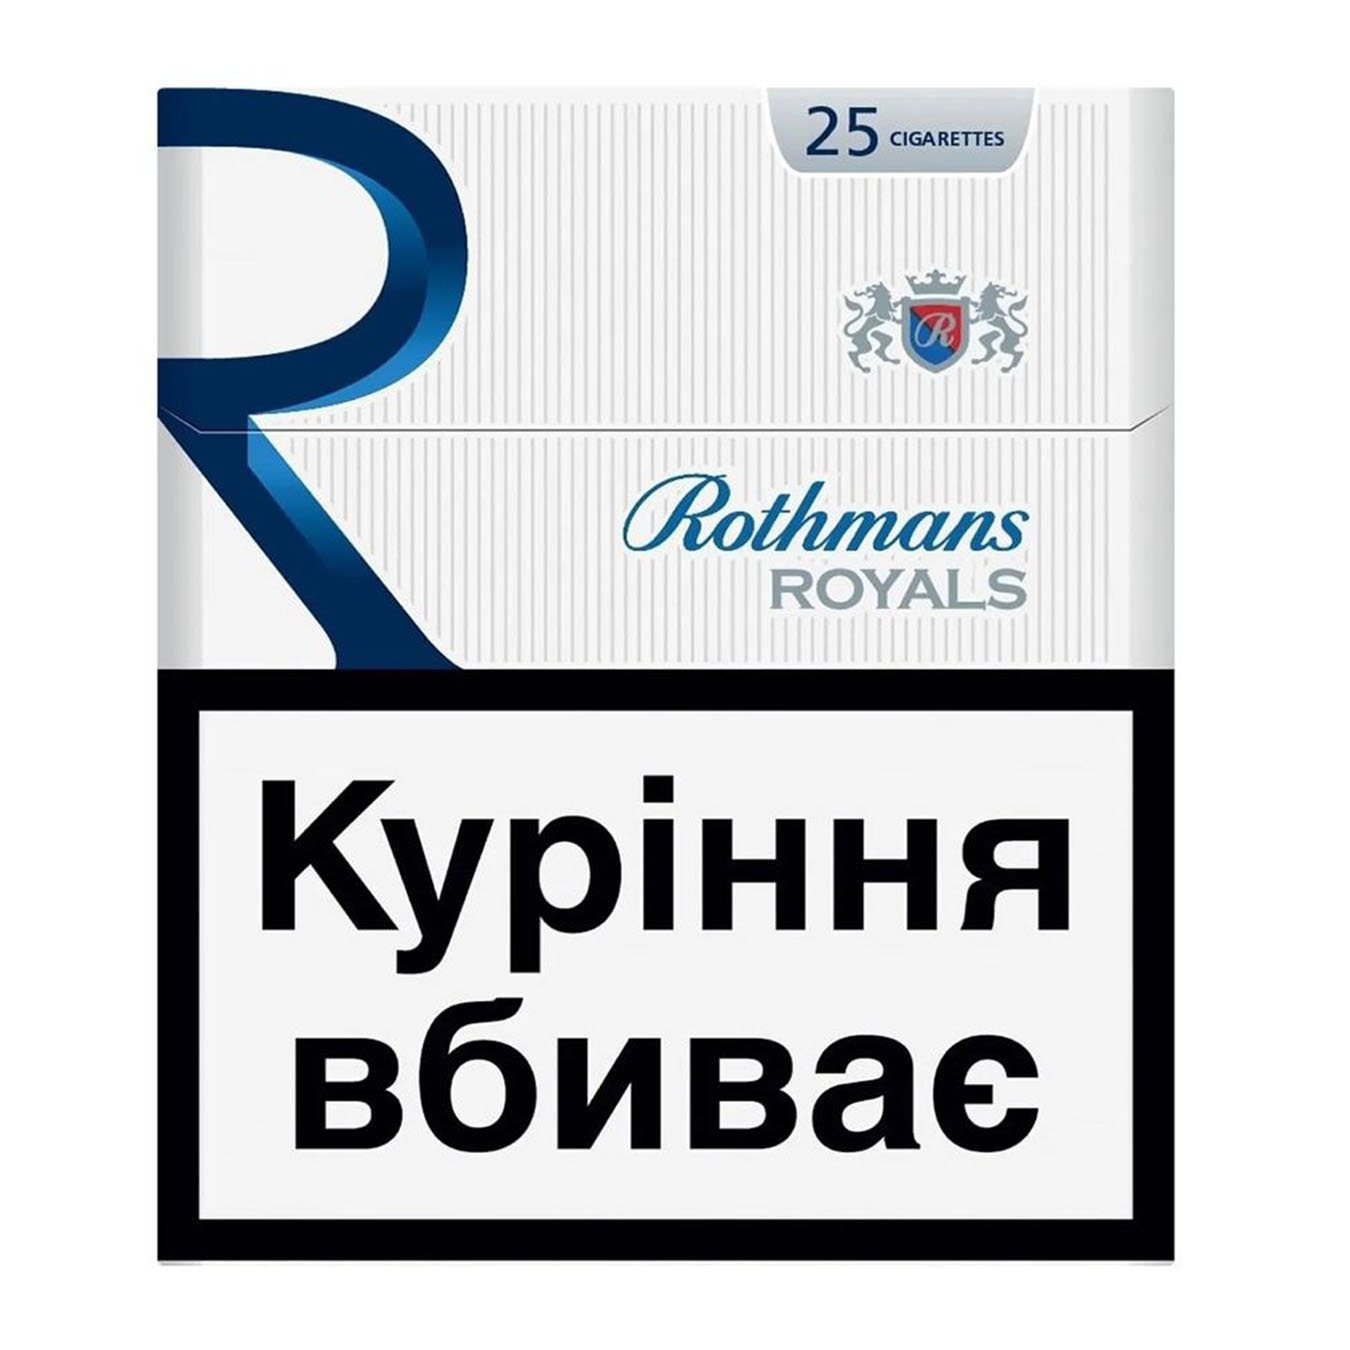 Rothmans Royals Blue Cigarettes 25pcs (the price is indicated without excise tax)